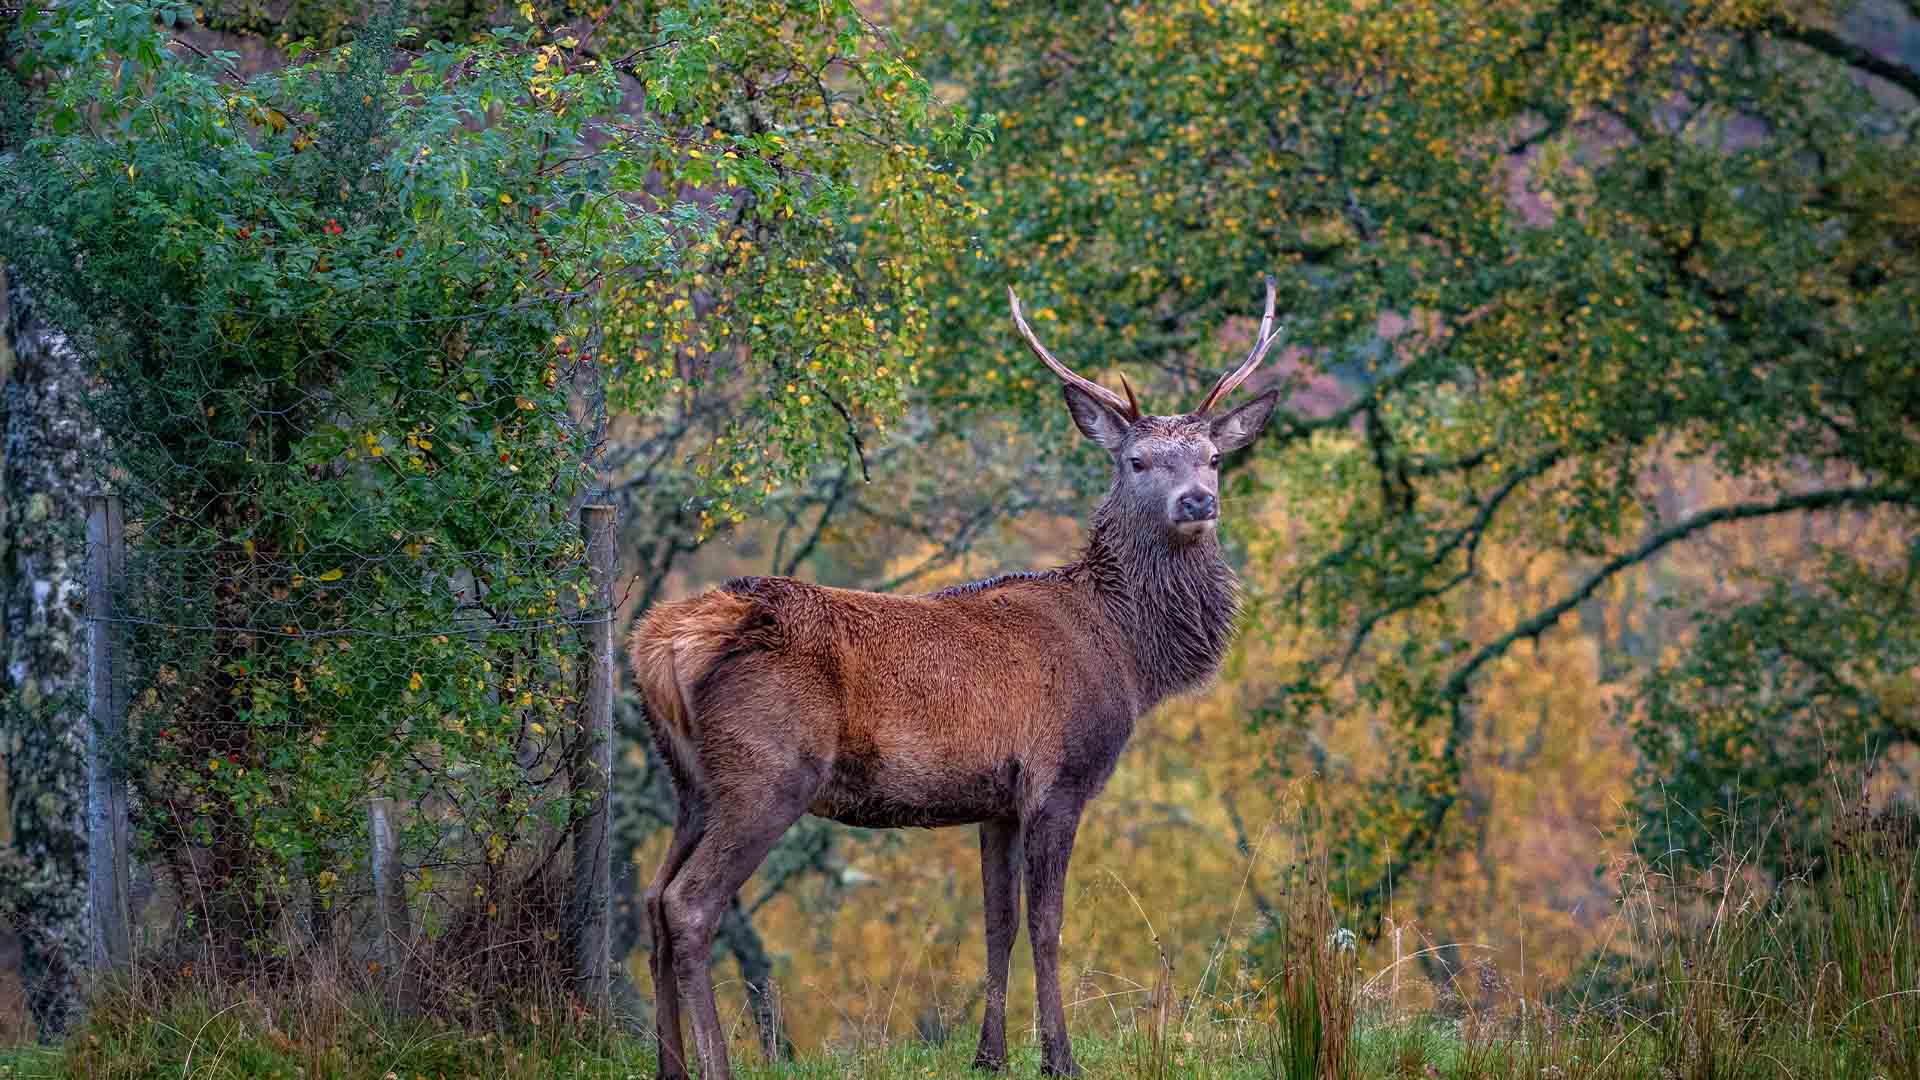 A red deer looks at the camera